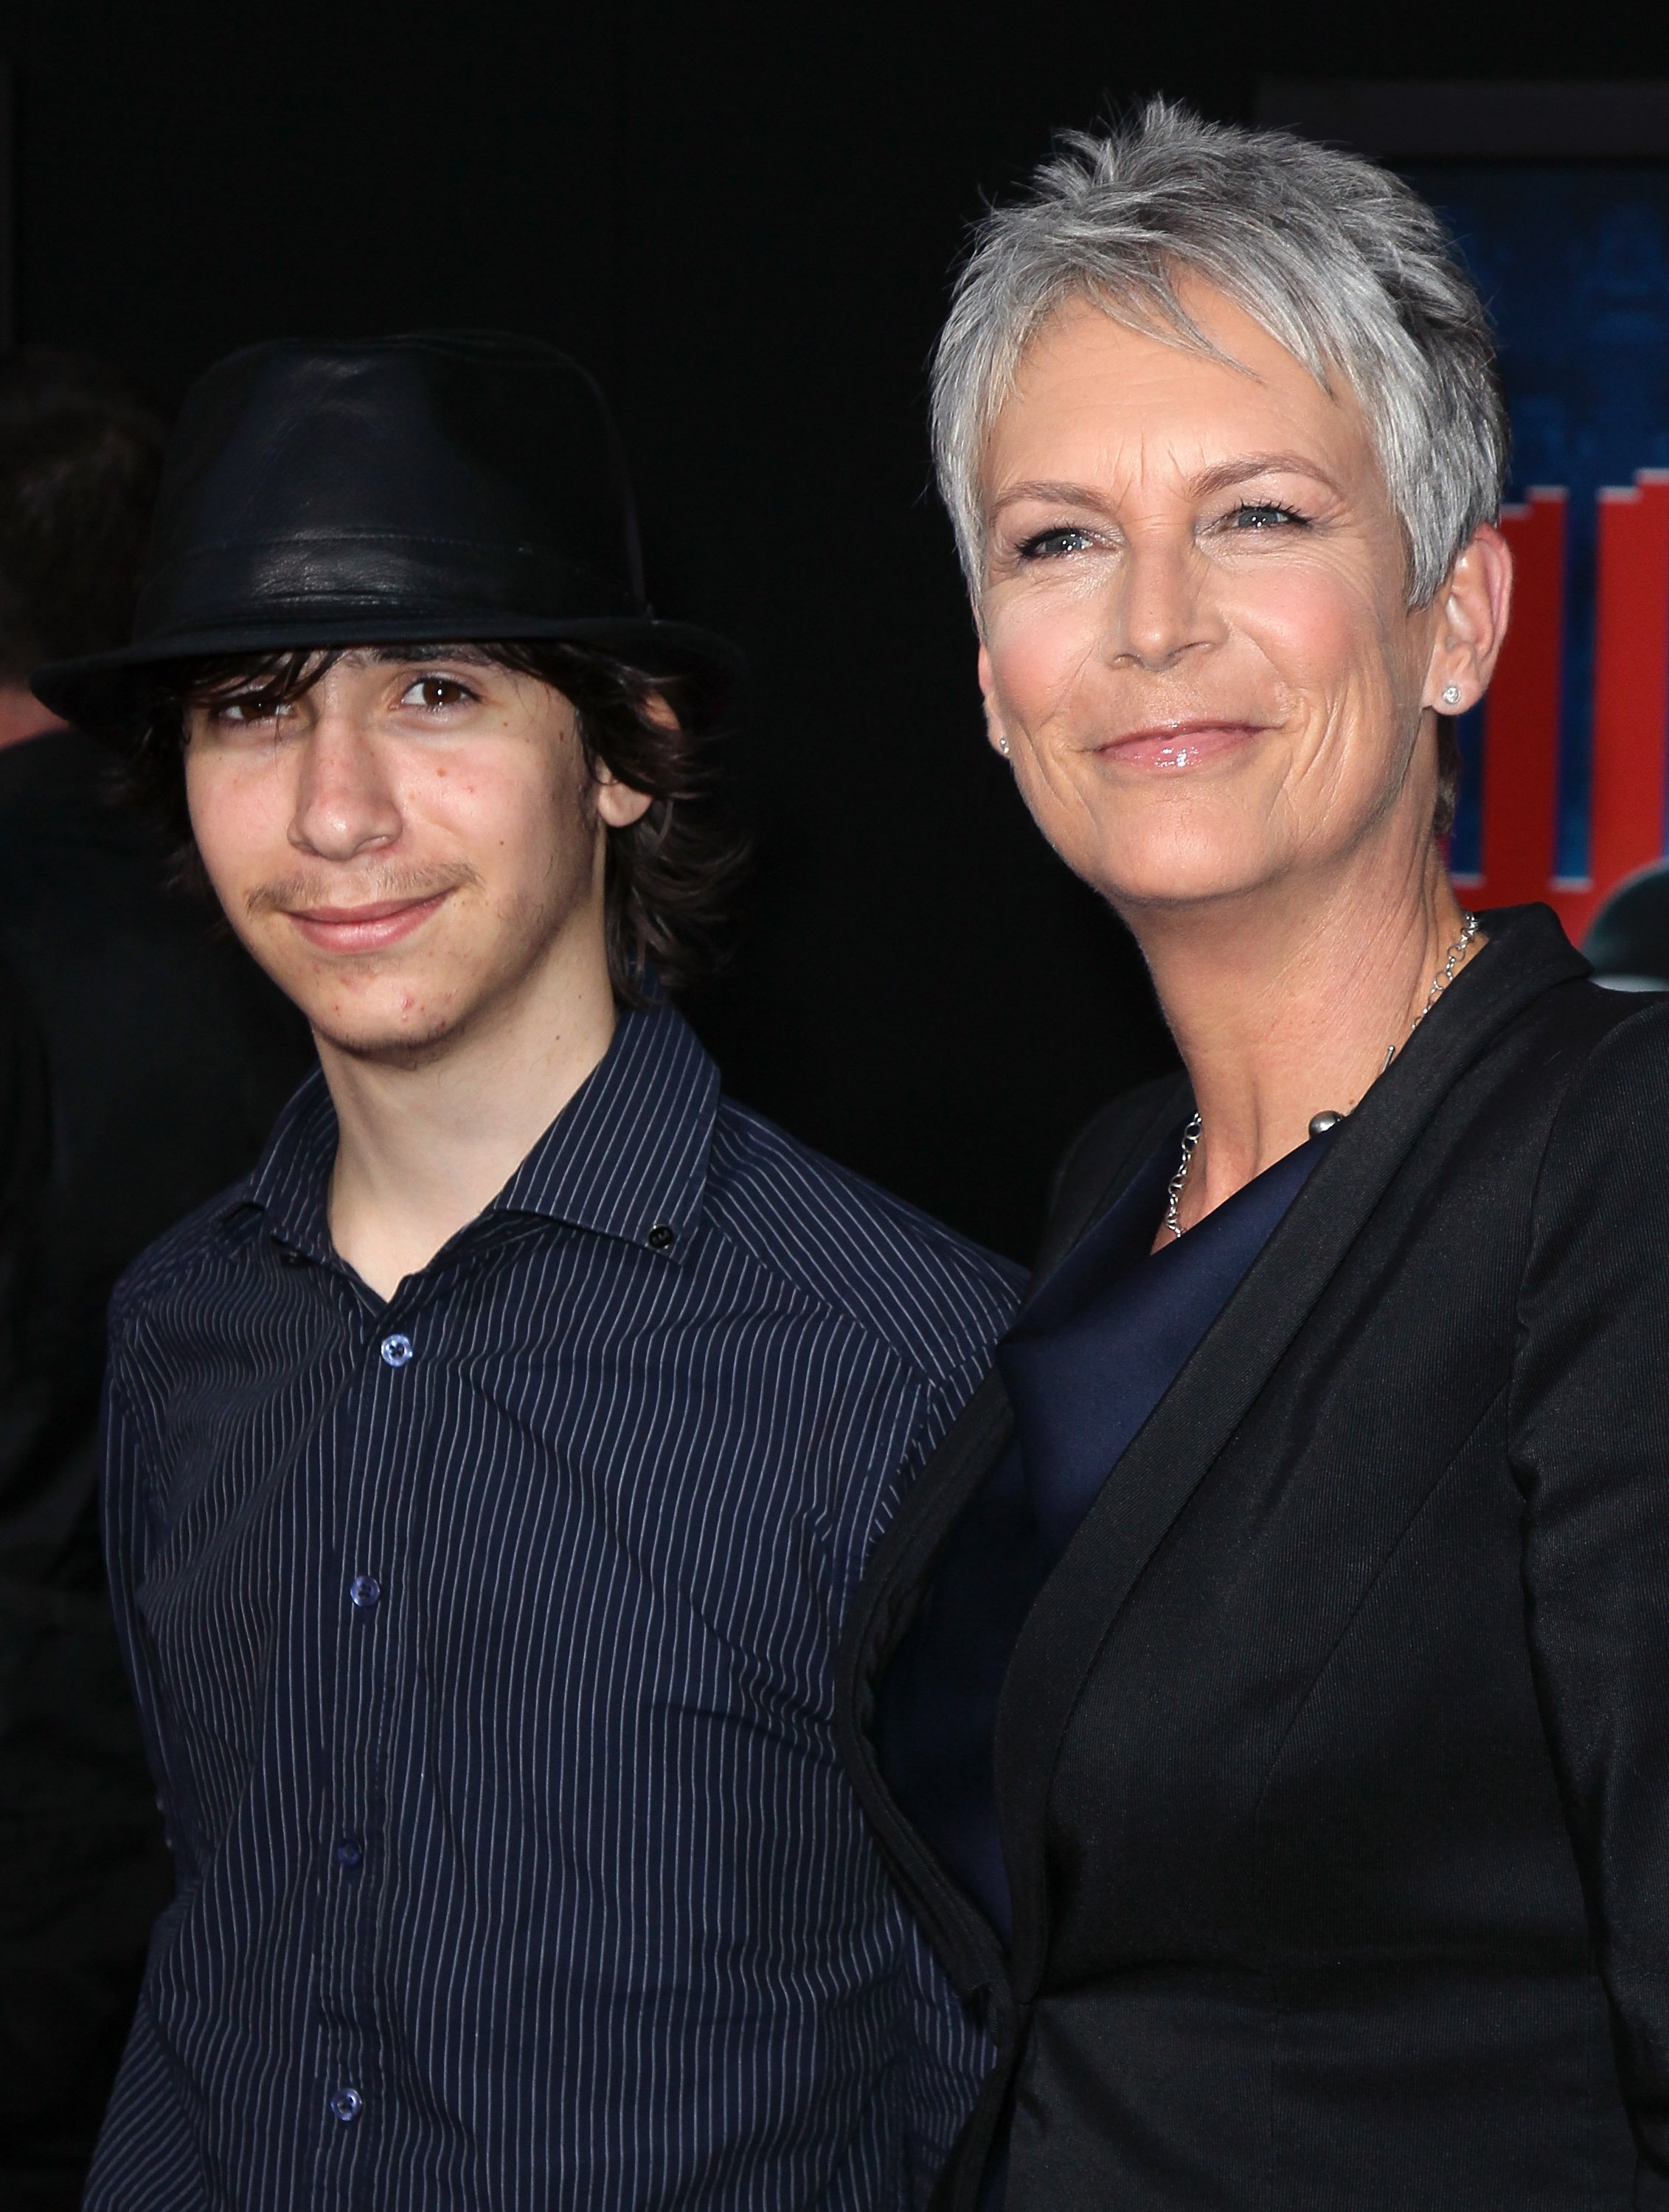 Actress Jamie Lee Curtis (R) and son Tom attend the premiere of Walt Disney Animation Studios' "Wreck-It Ralph" at the El Capitan Theatre on October 29, 2012  | Source: Getty Images